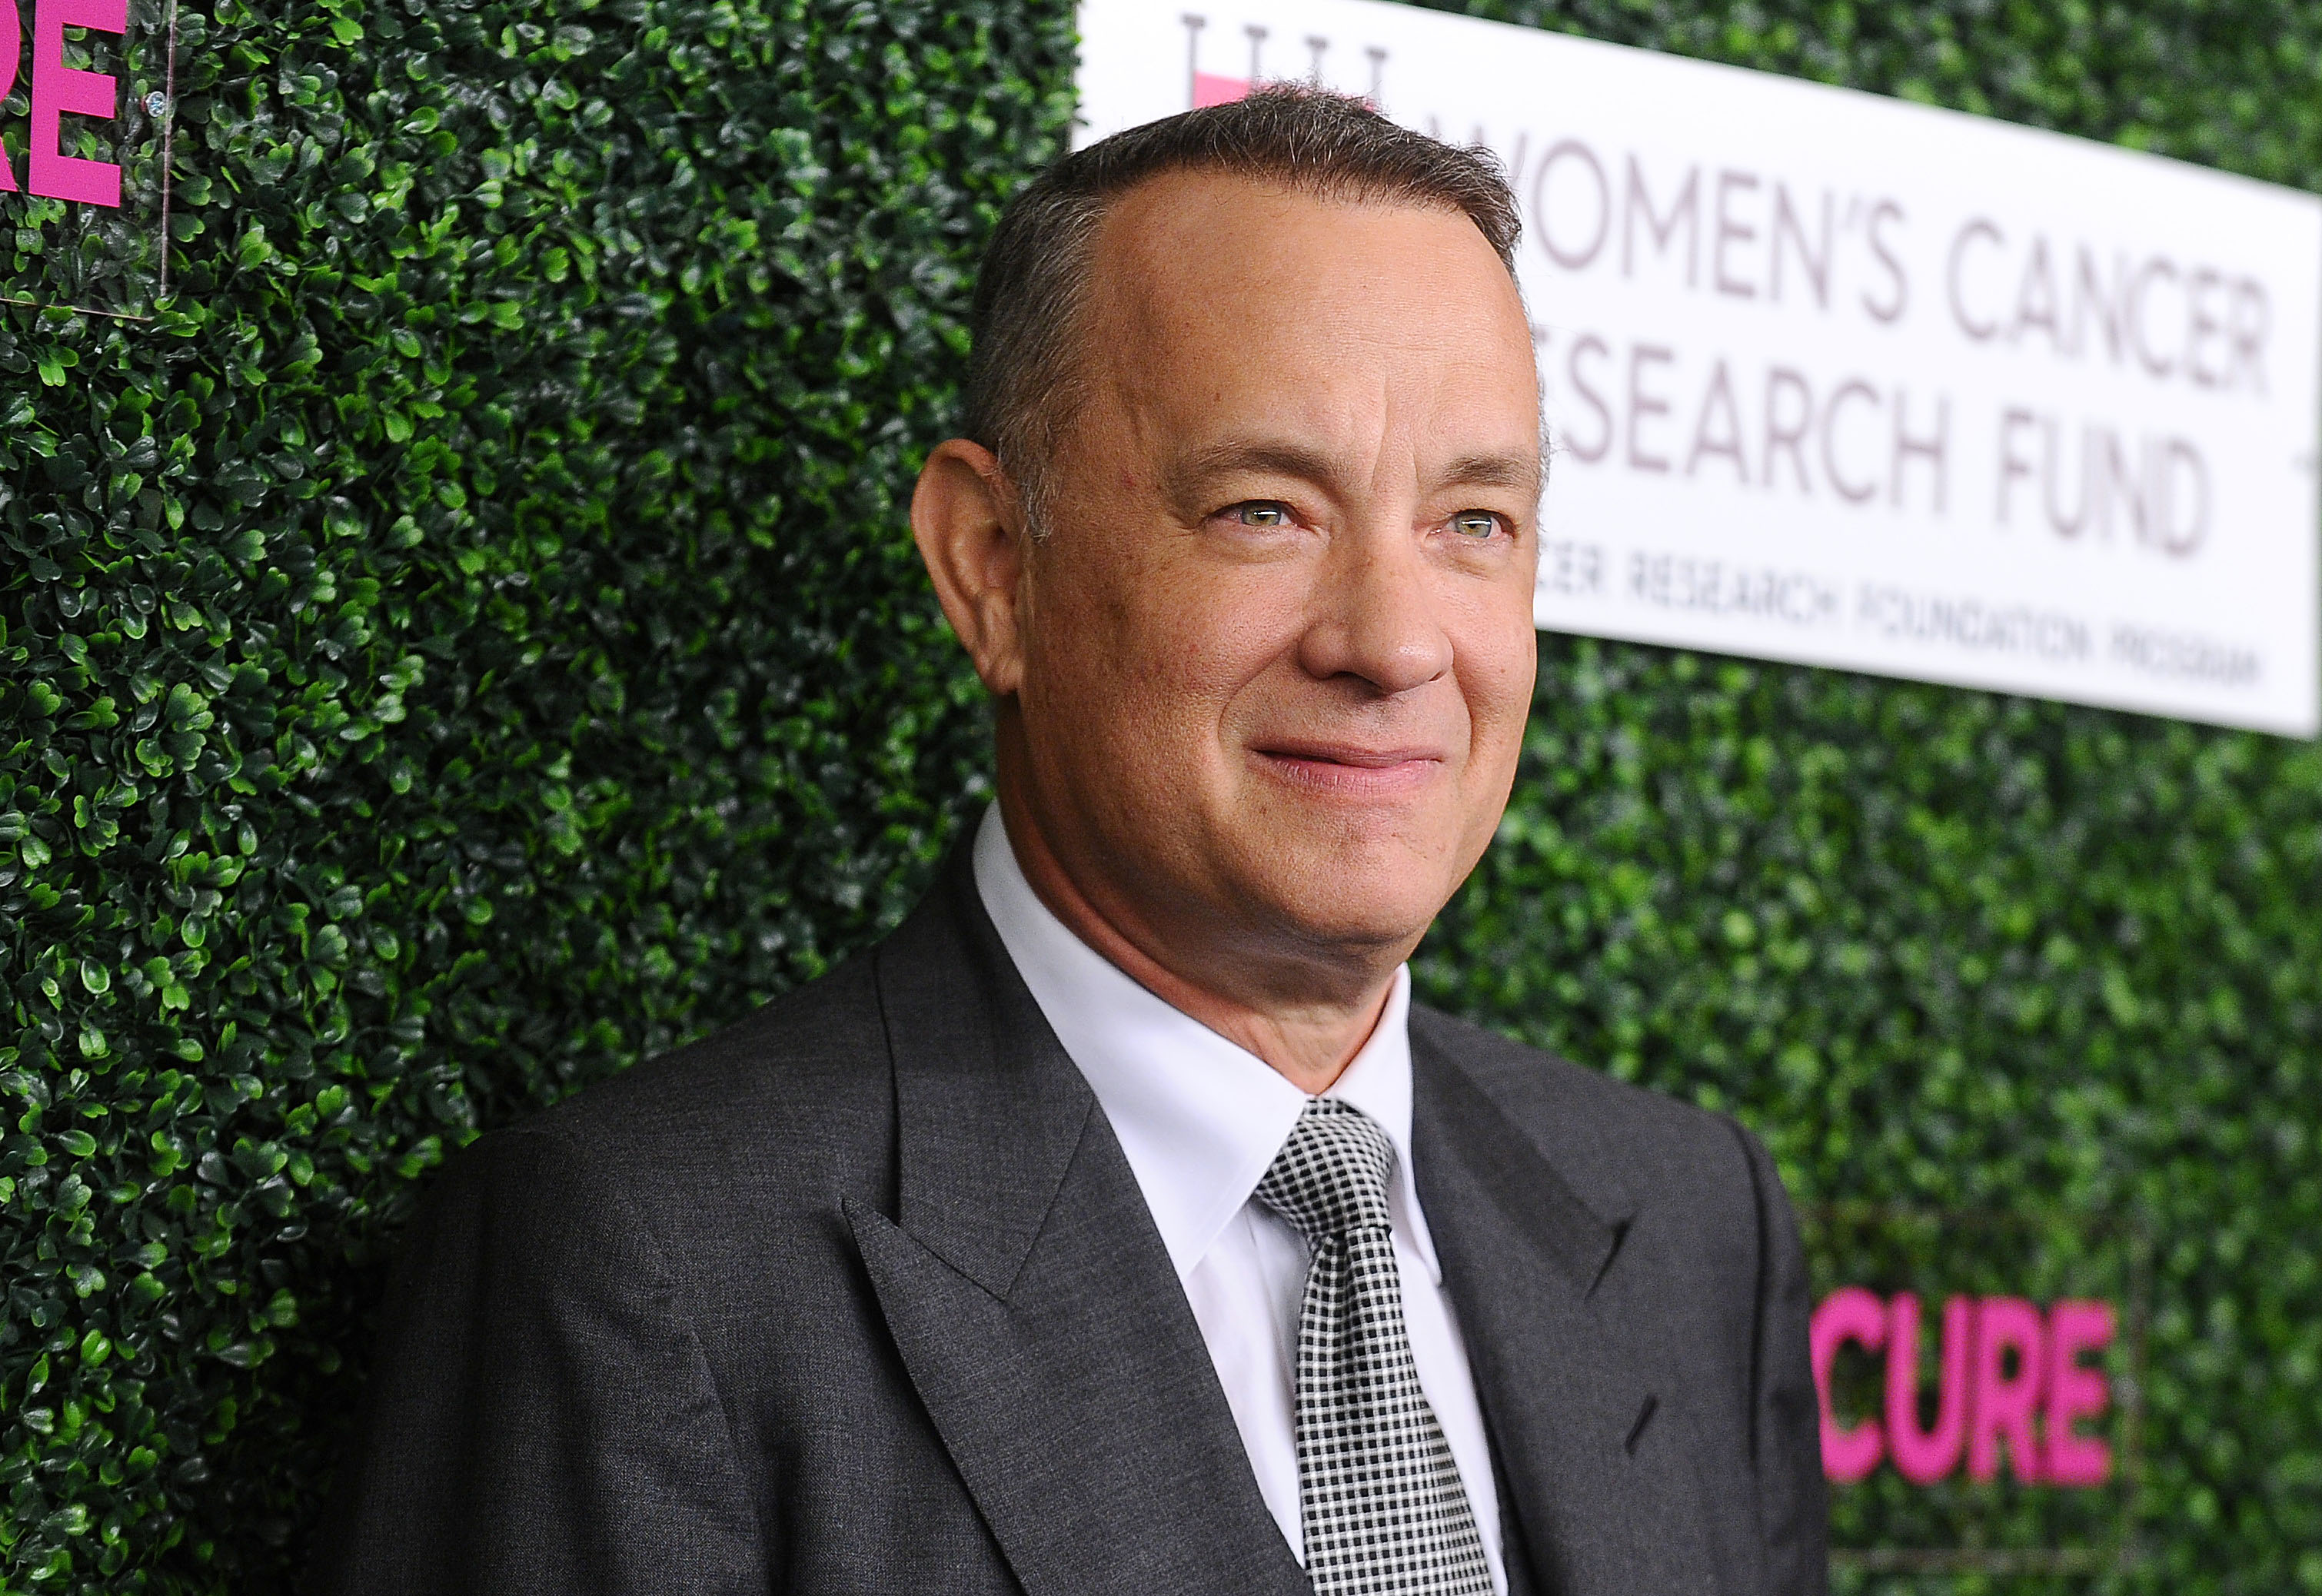 Tom Hanks To Be Honored At The Golden Globe Awards 2020